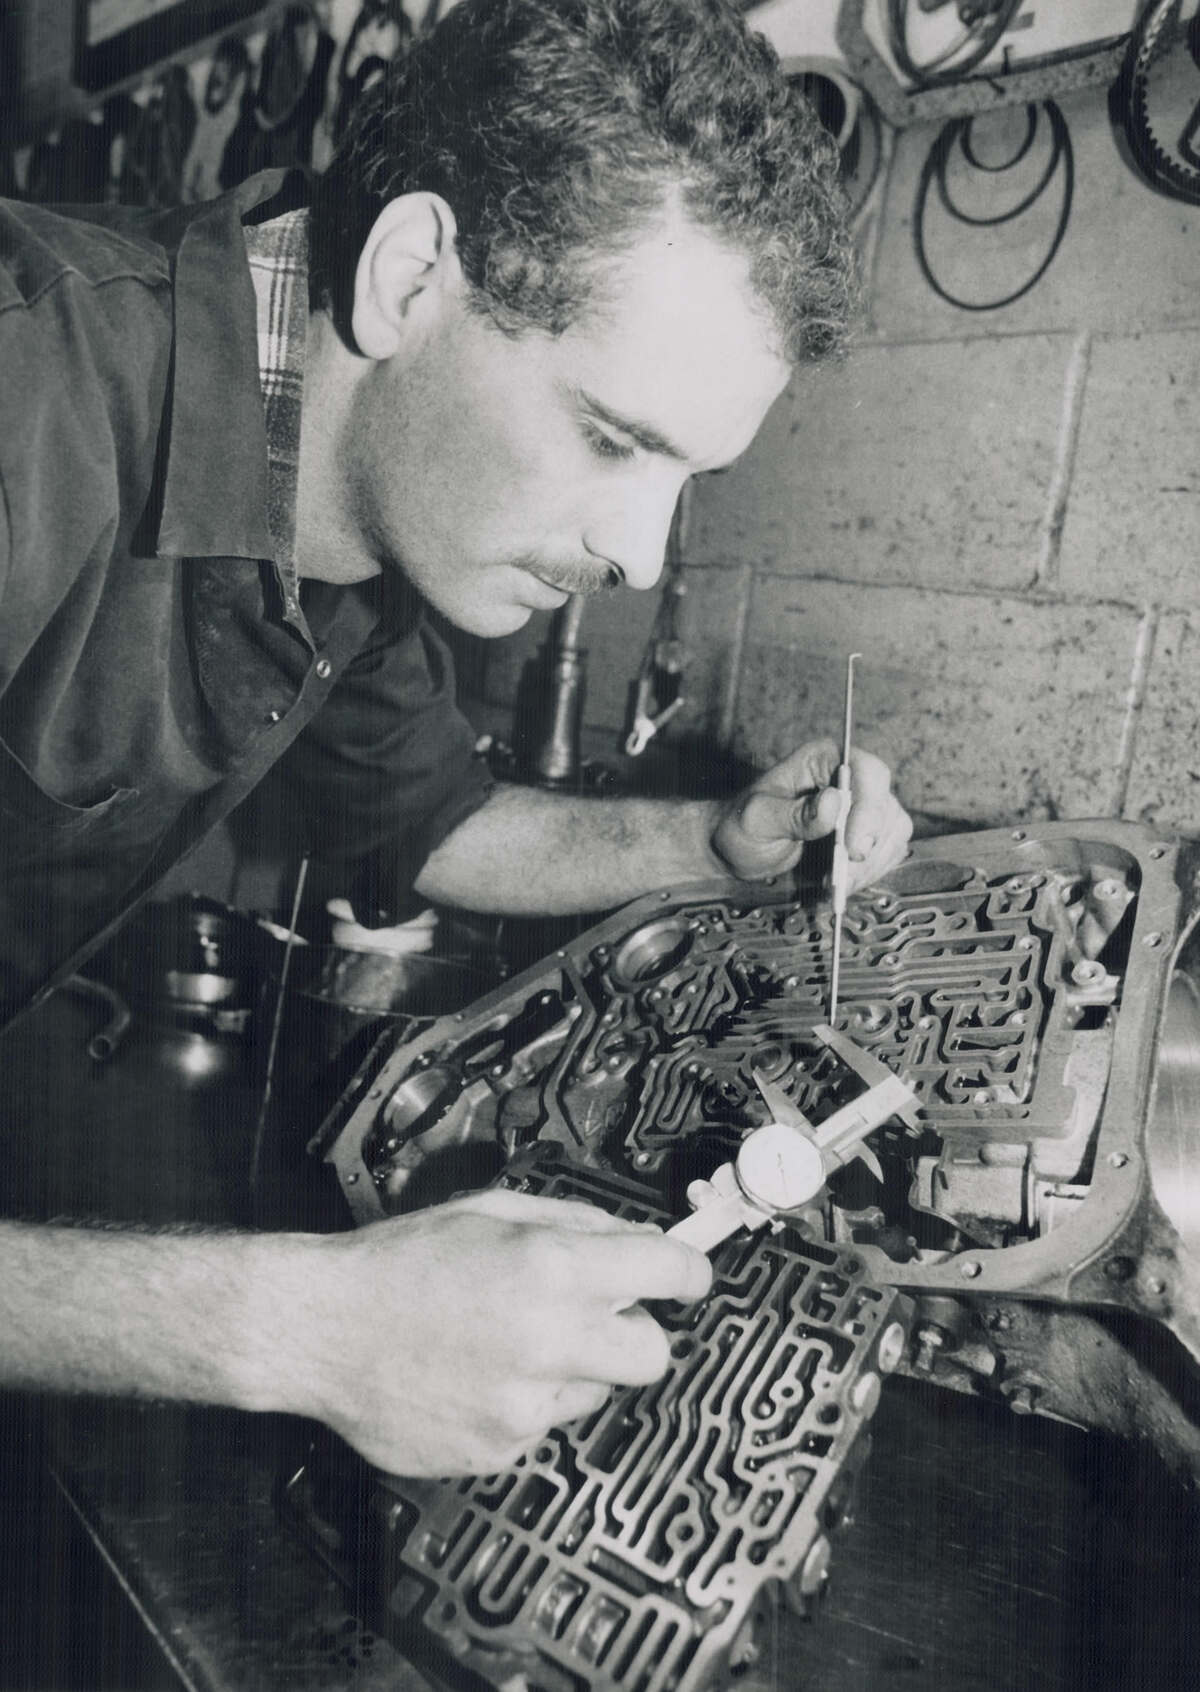 Automatic transmission technician working on transmission